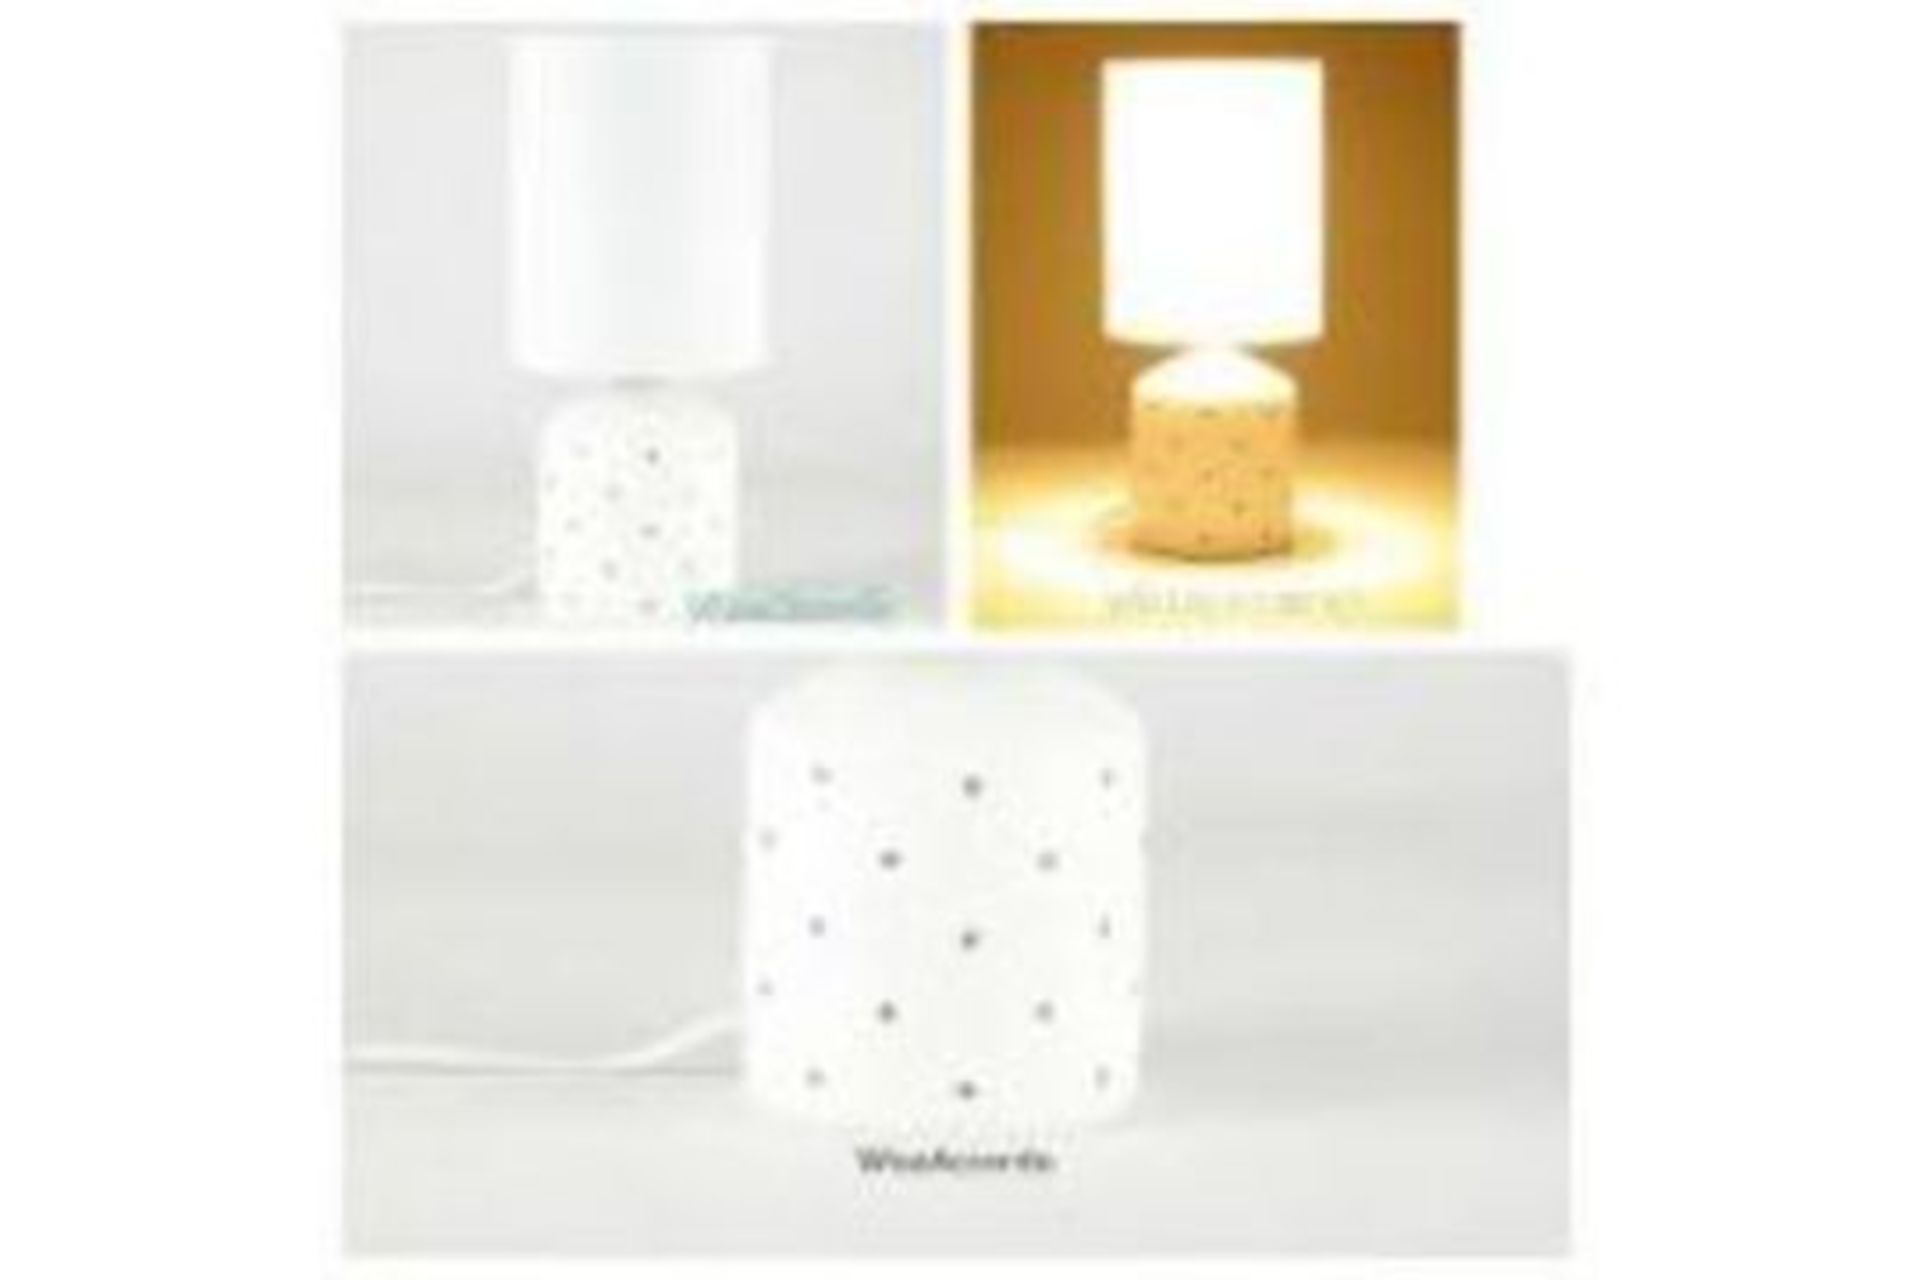 3 X NEW BOXED White Bumblebee Table Lamp (50848751). Coming with a white shade and a ceramic base